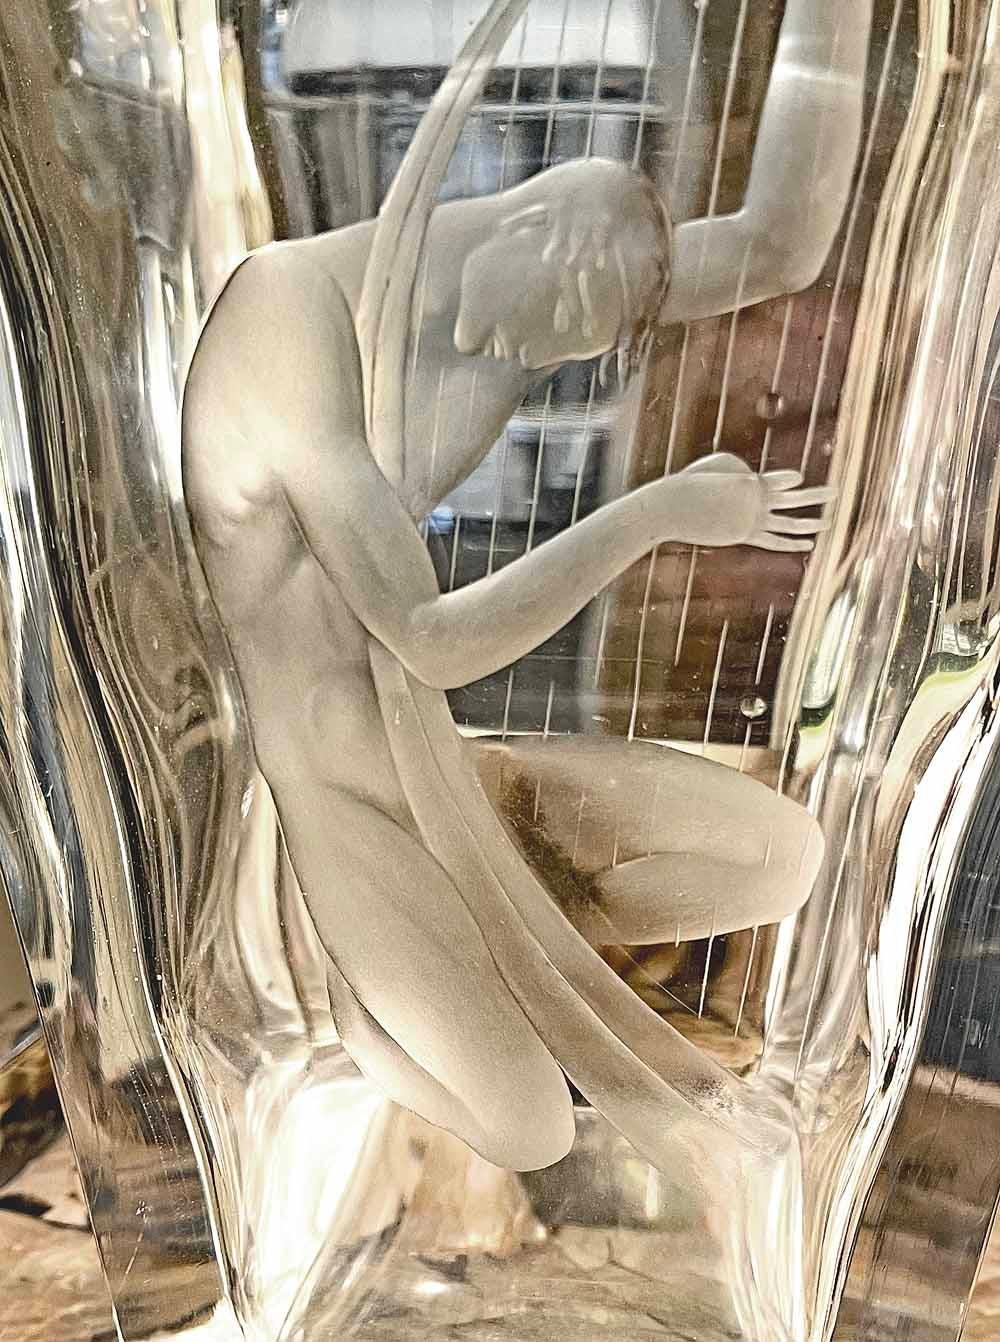 One of Vicke Lindstrand's characterisitically elegant, stylized nude figures for the Orrefors glass company in Sweden at the height of the Art Deco era in 1939, this piece features an engraved male figure playing a llife-sized harp, decorating a